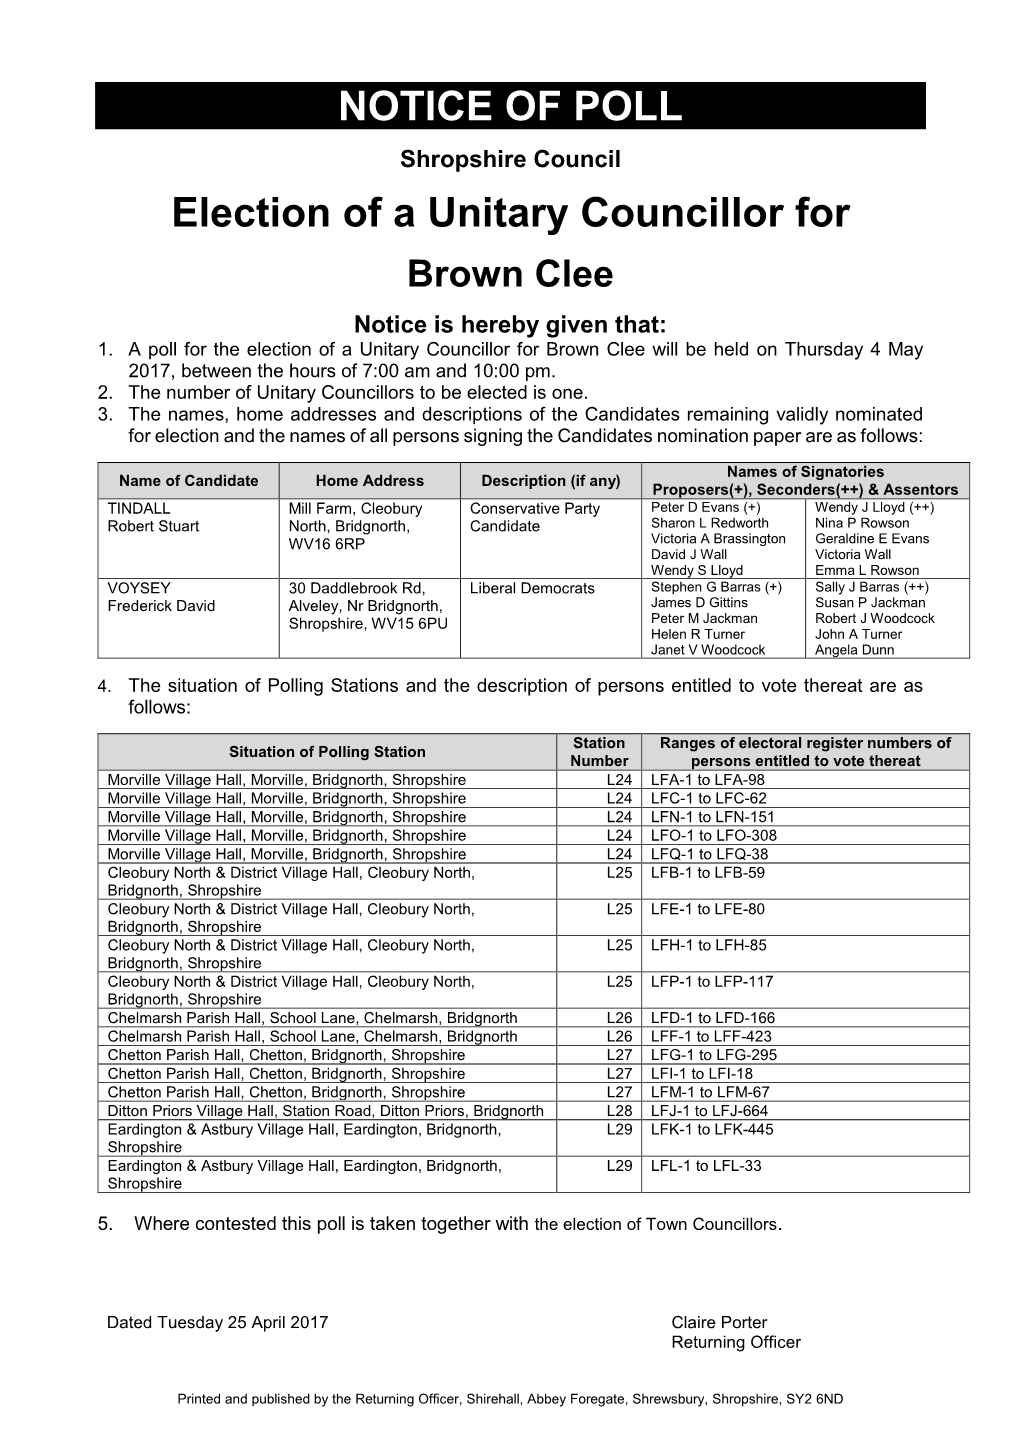 Election of a Unitary Councillor for Brown Clee Will Be Held on Thursday 4 May 2017, Between the Hours of 7:00 Am and 10:00 Pm